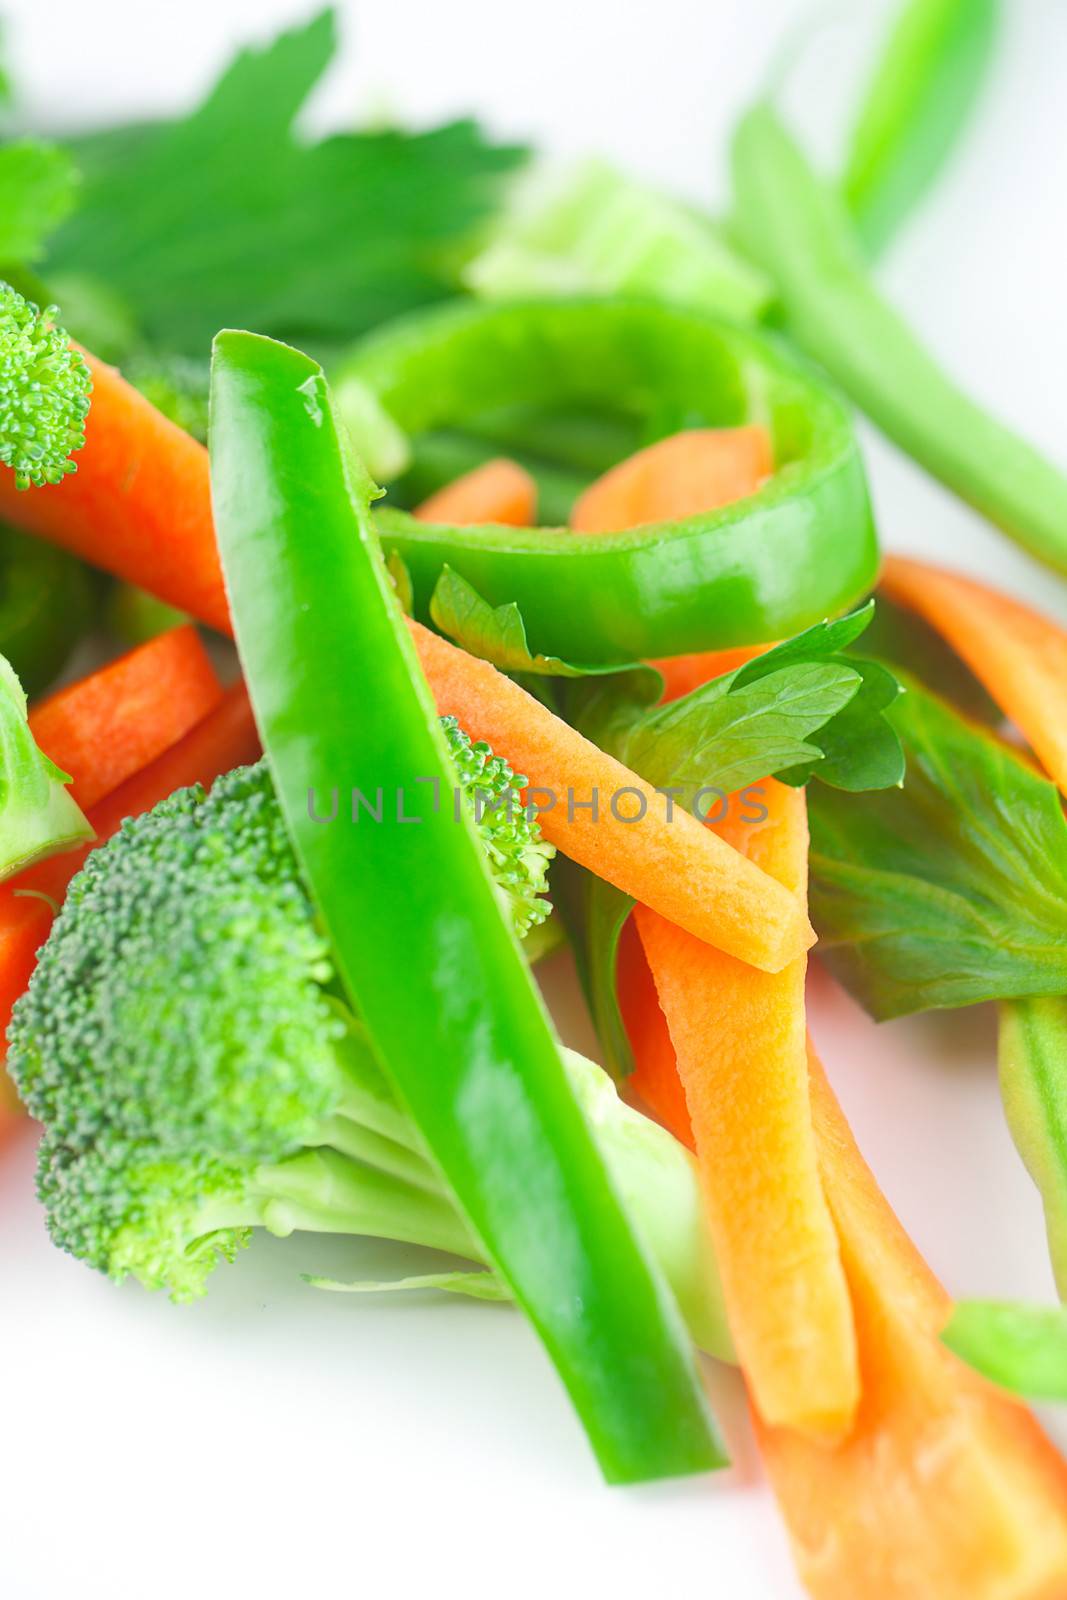 carrot, celery, broccoli and pepper isolated on white by jannyjus